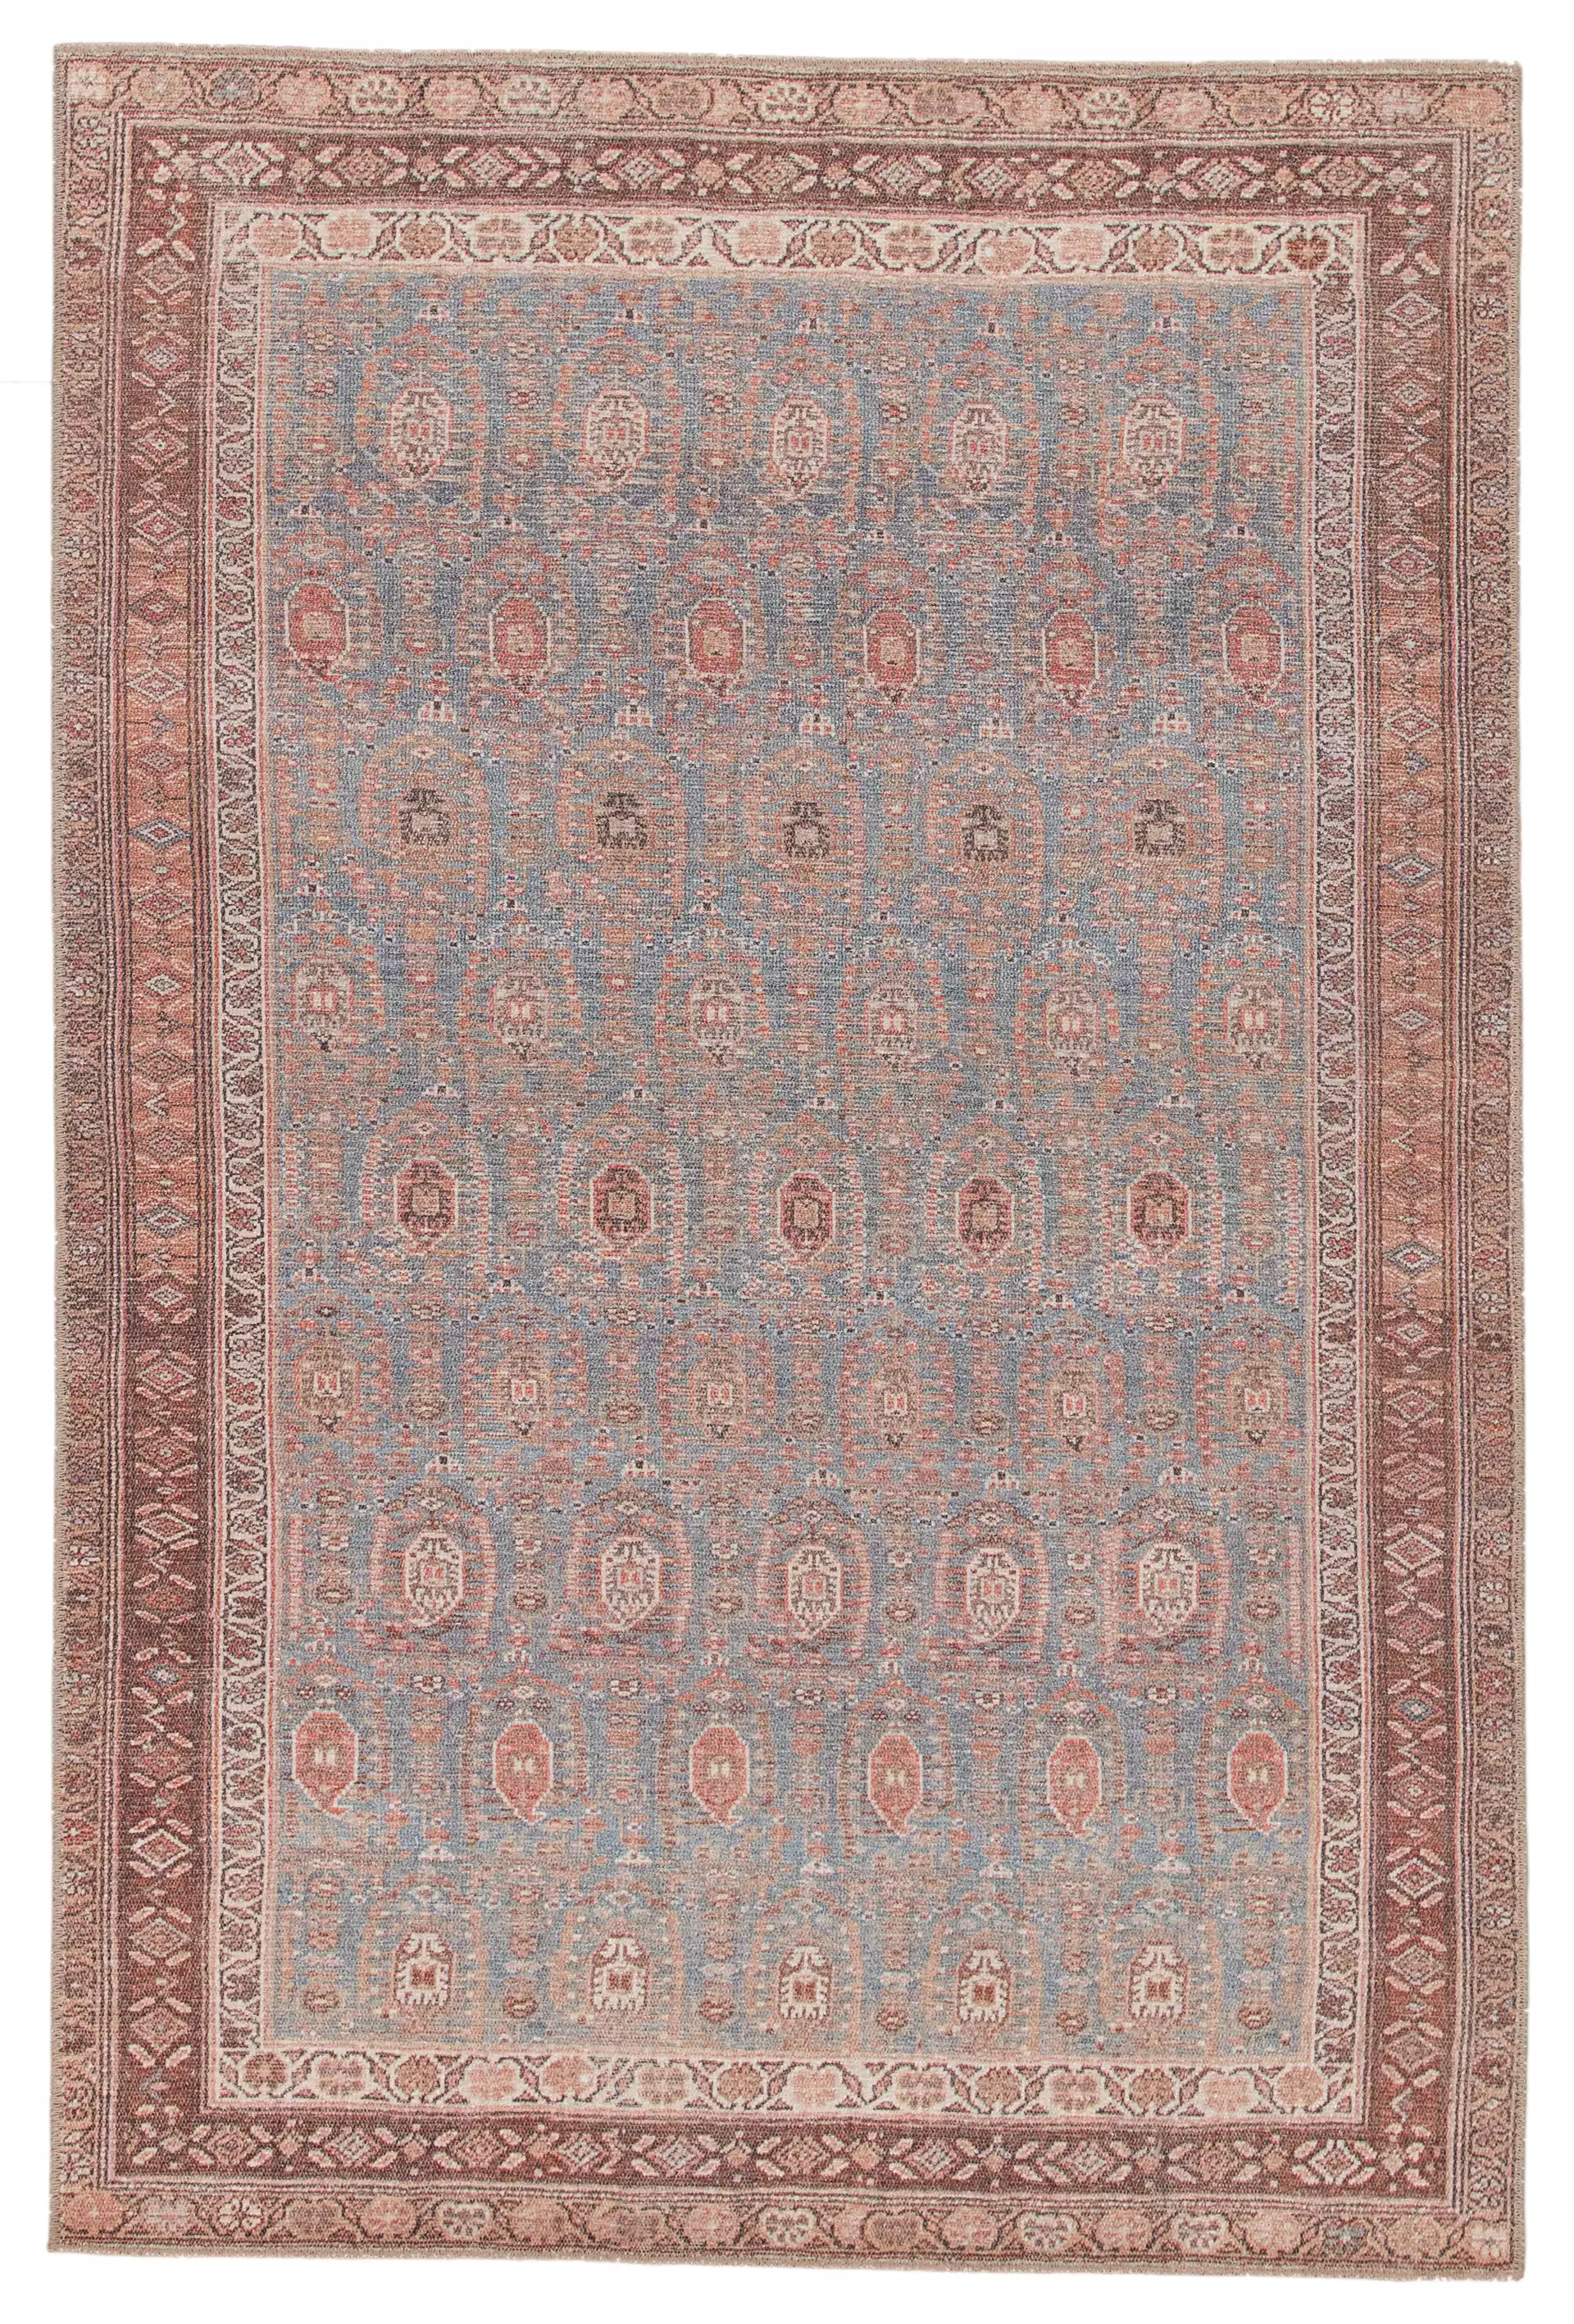 Vibe by Tielo Oriental Area Rug, Blue & Brown, 5 ' x 7'6"